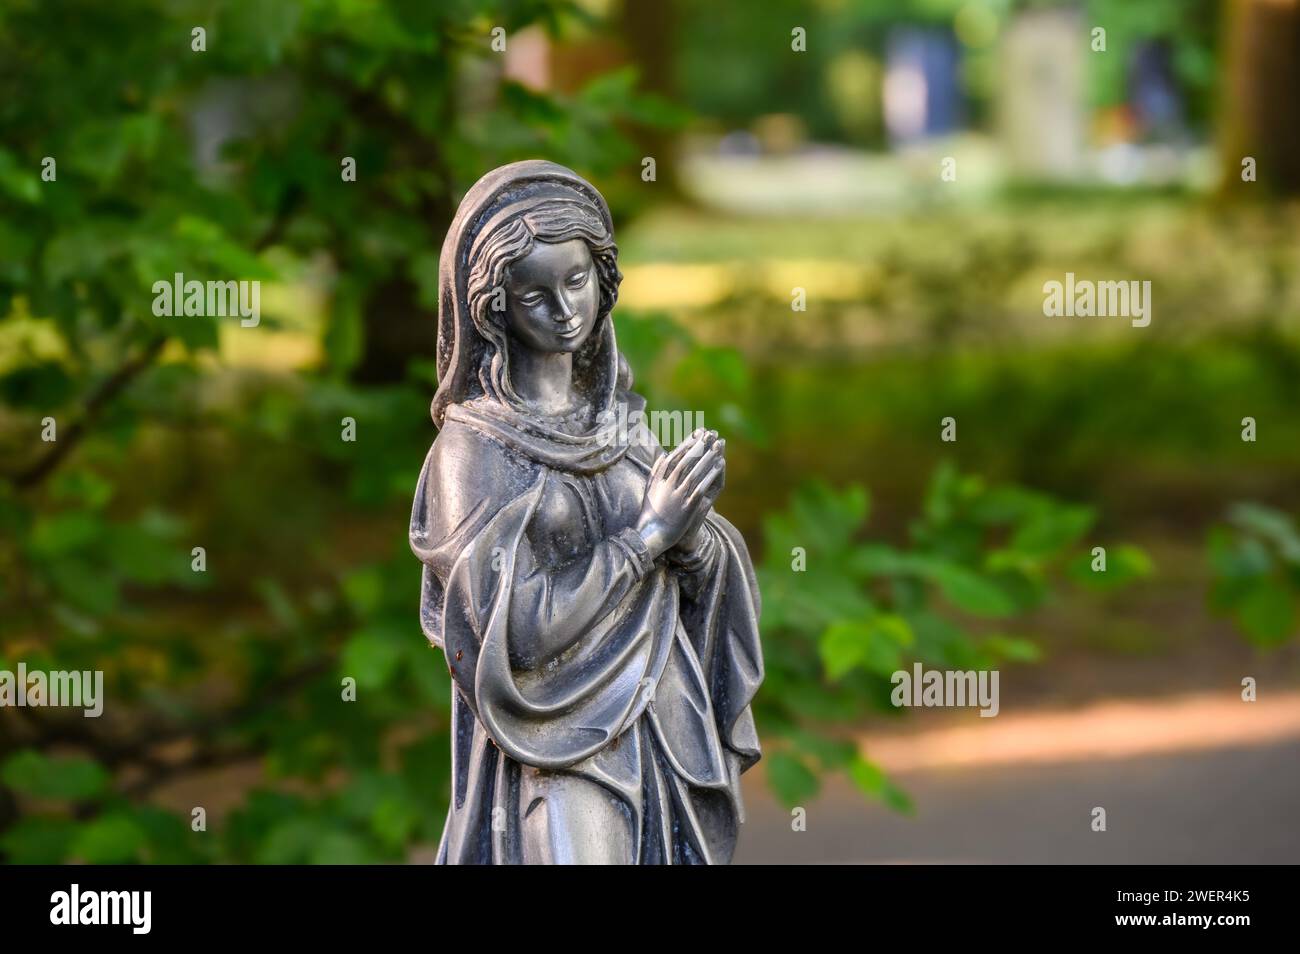 Praying Madonna figure at the cemetery Stock Photo